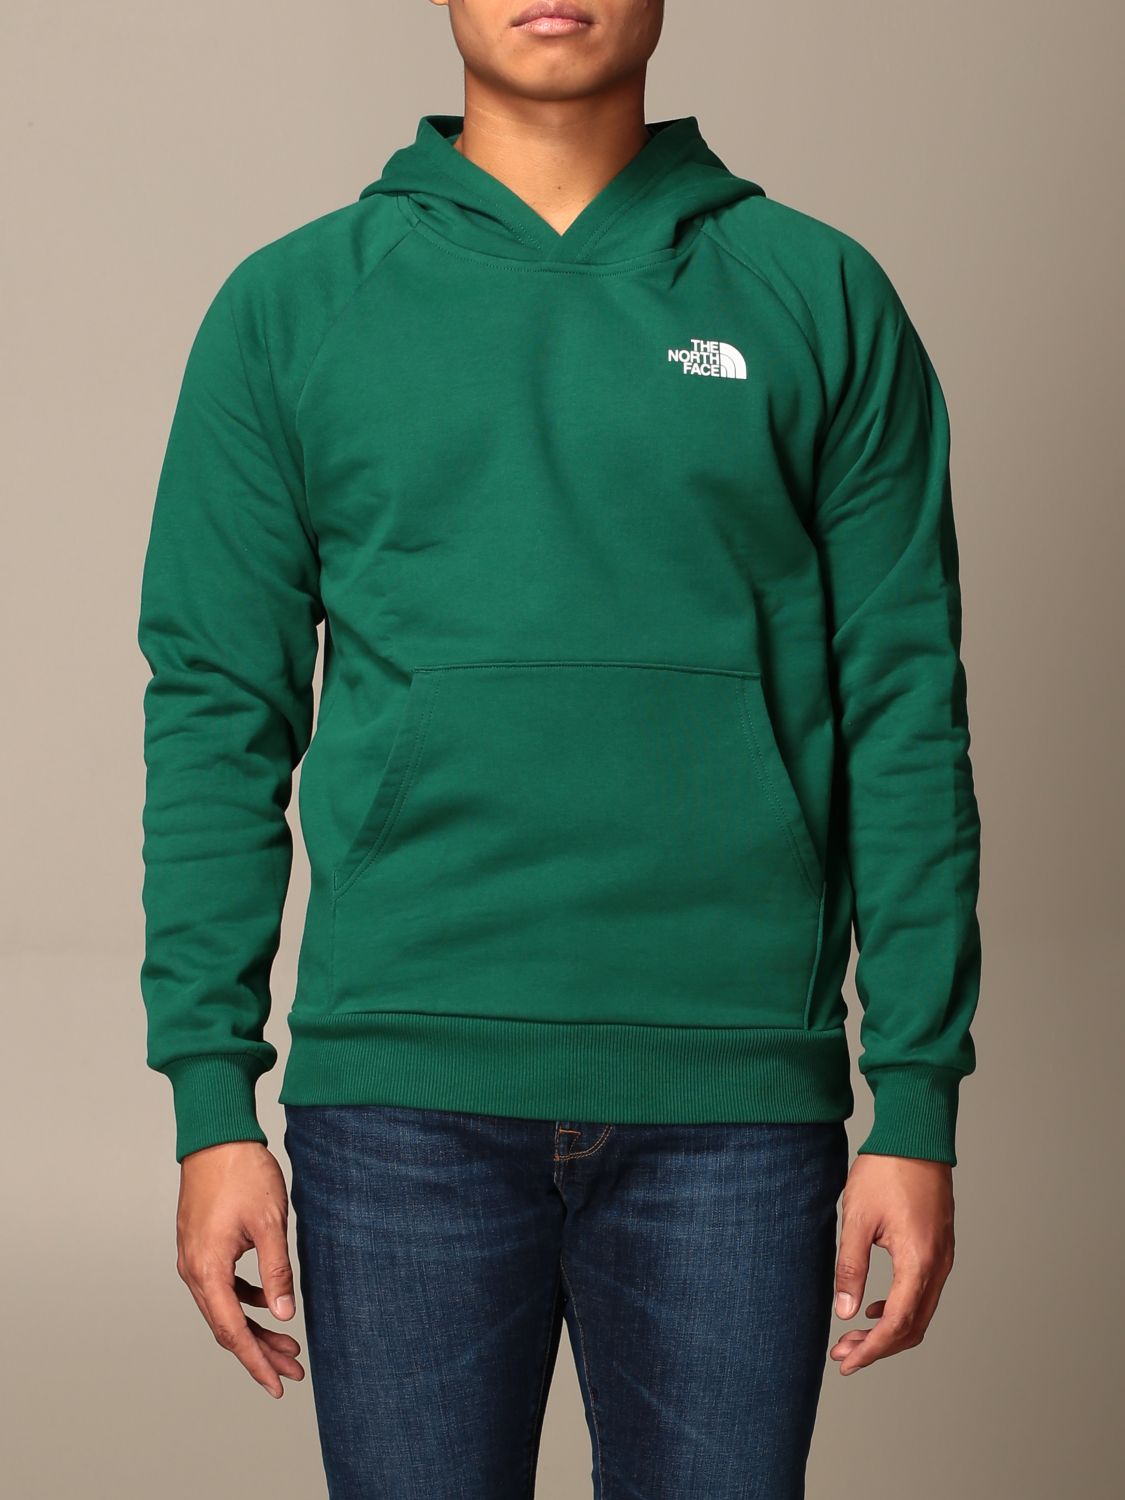 shower Ridiculous spine THE NORTH FACE: hooded sweatshirt - Green | The North Face sweatshirt  NF0A2ZWU online on GIGLIO.COM